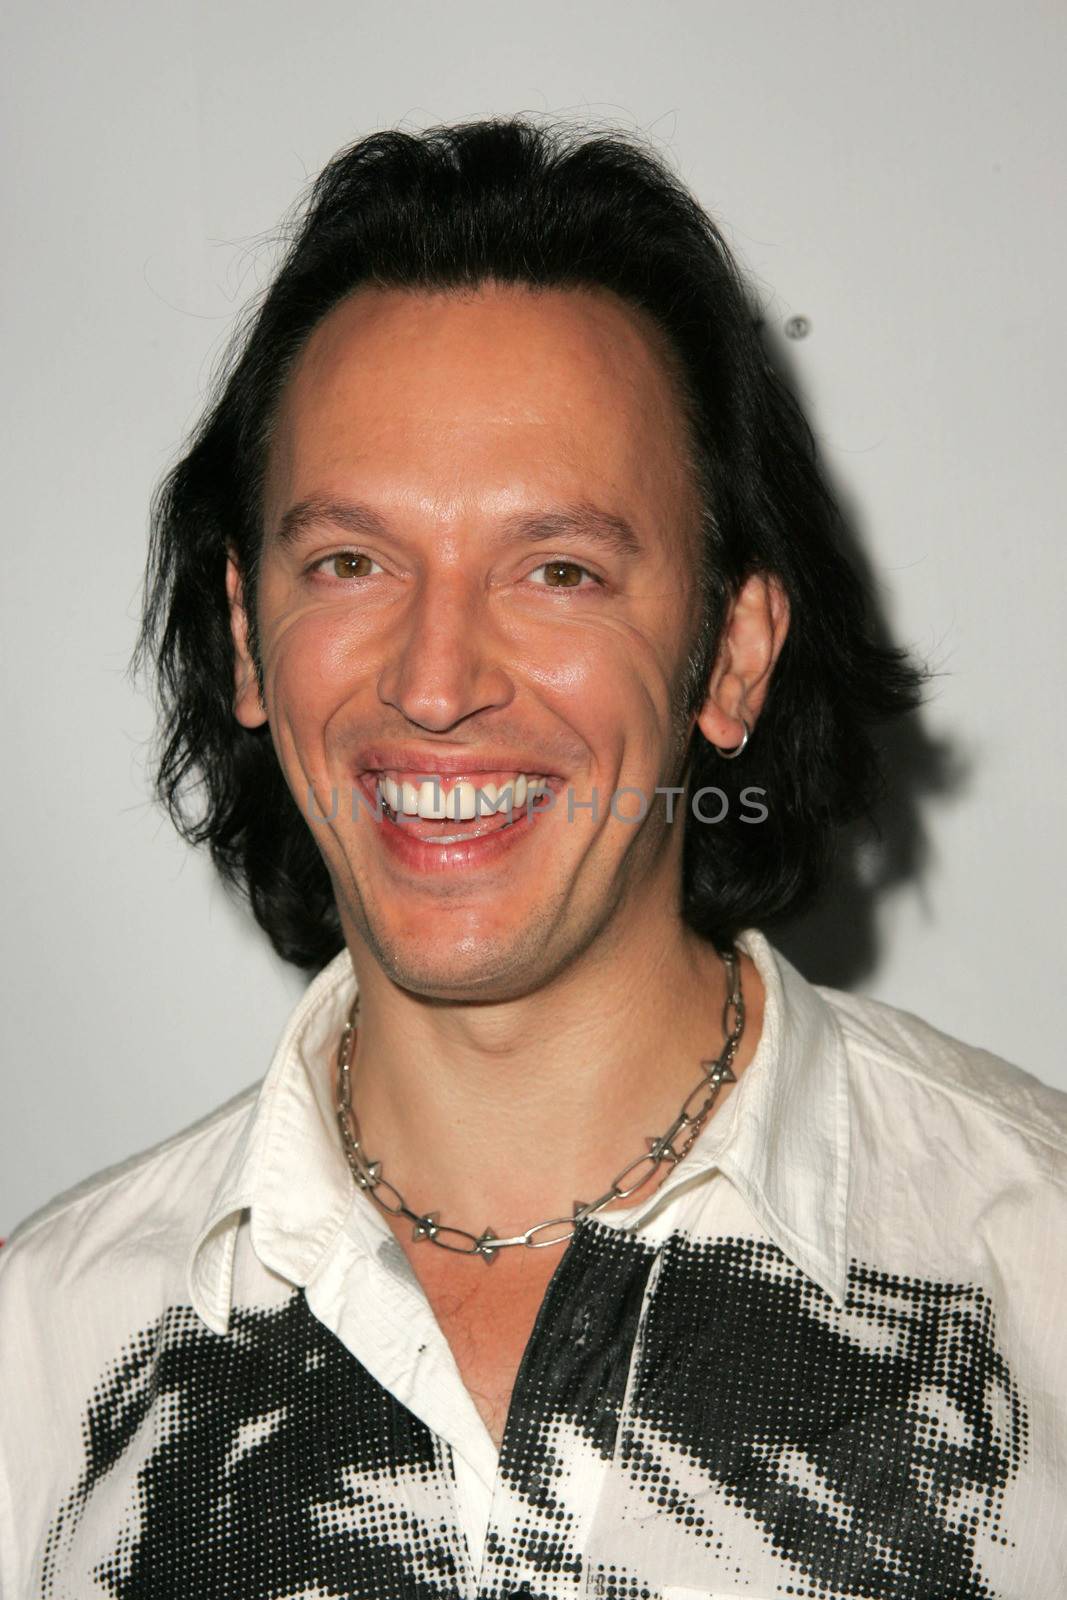 Steve Valentine at the In Touch Presents Pets And Their Stars Party, Cabana Club, Hollywood, CA 09-21-05